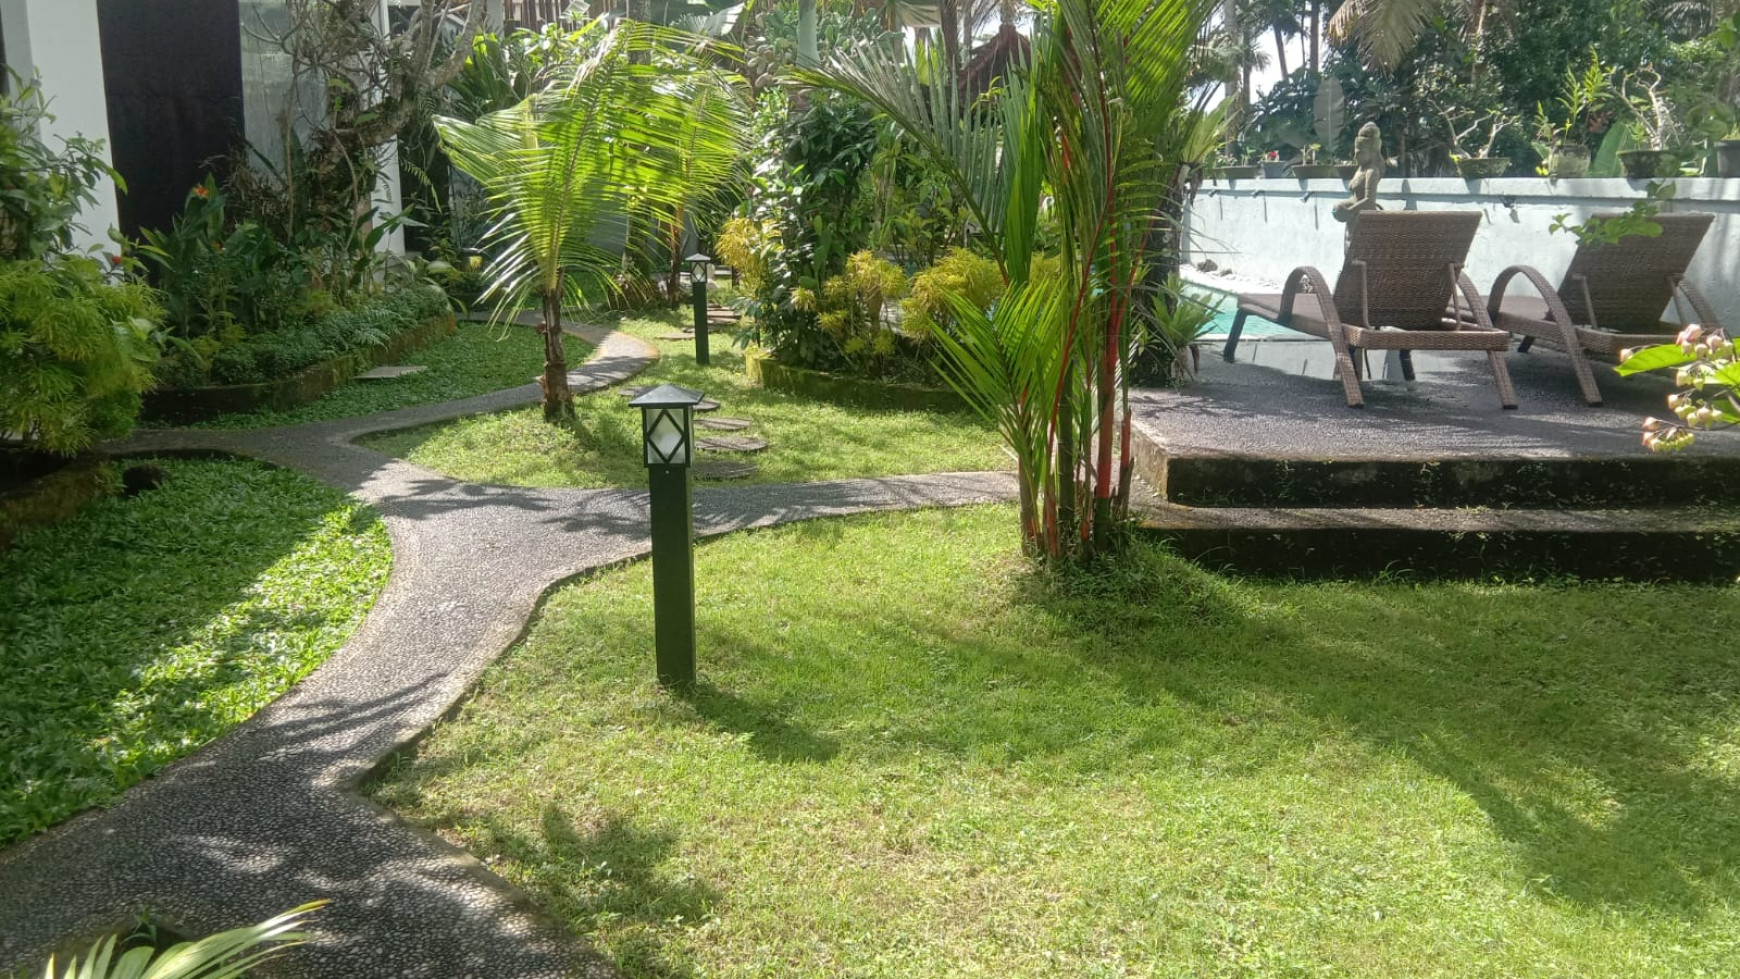 5 Modern Bedroom Villa on 805 sq m of Freehold Land with Rice Field and Jungle Views 10 Minutes from Ubud Center